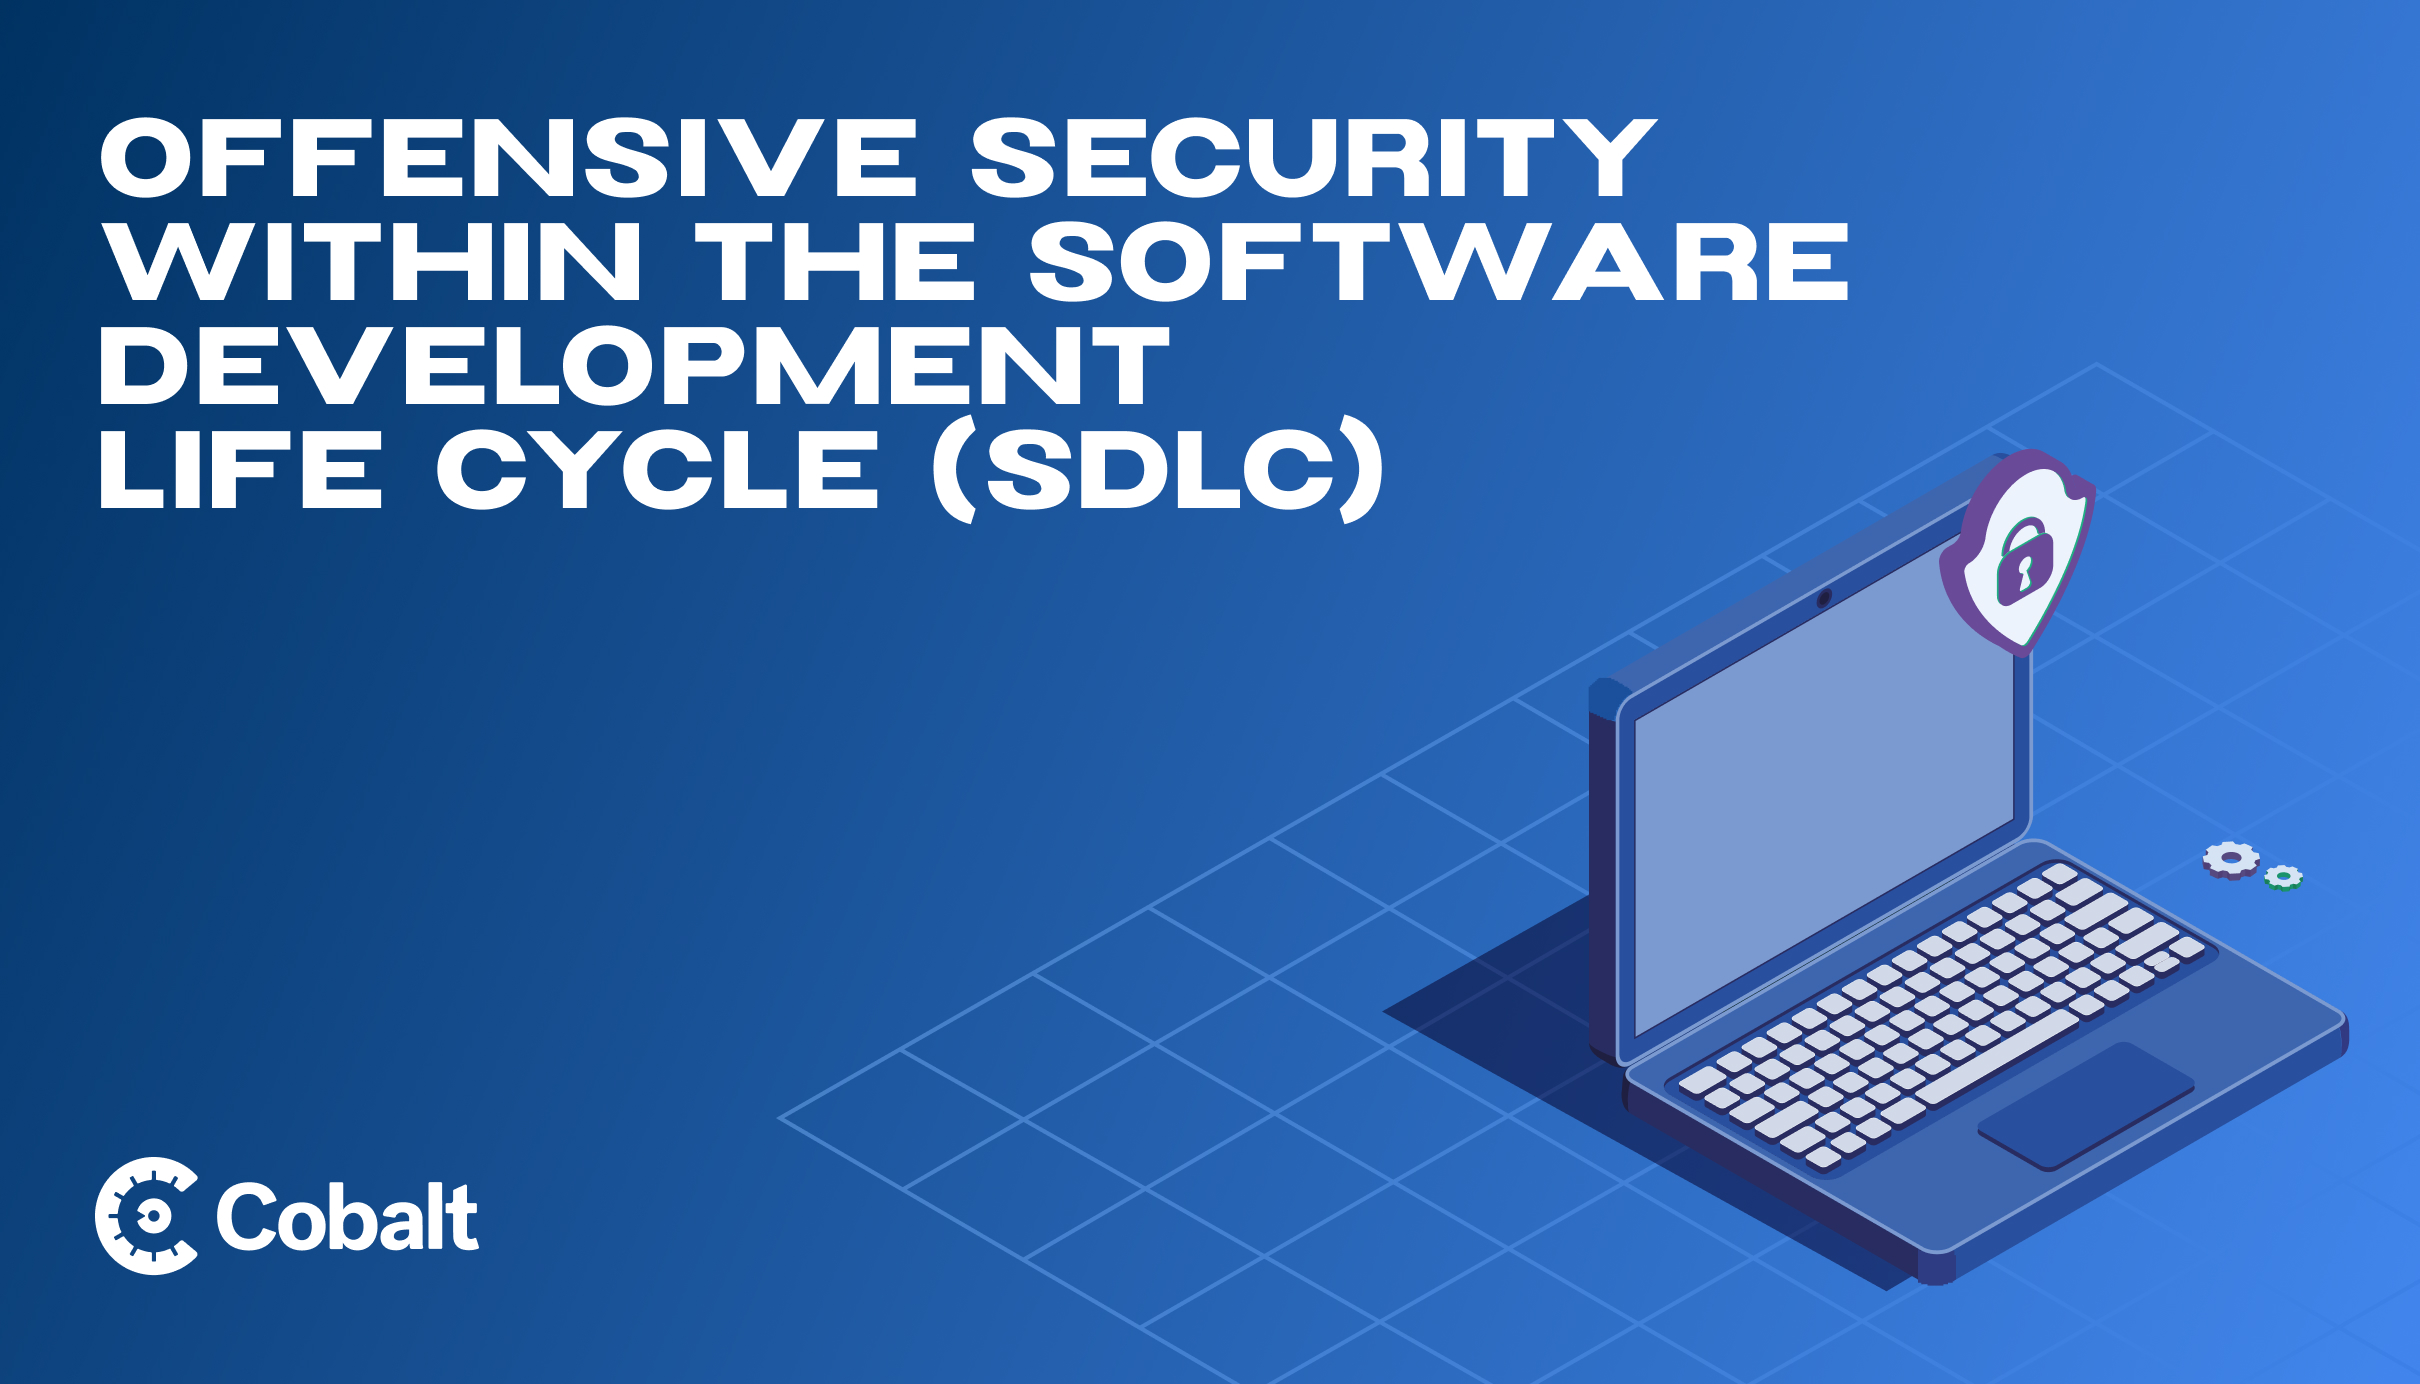 Offensive Security within the Software Development Life Cycle